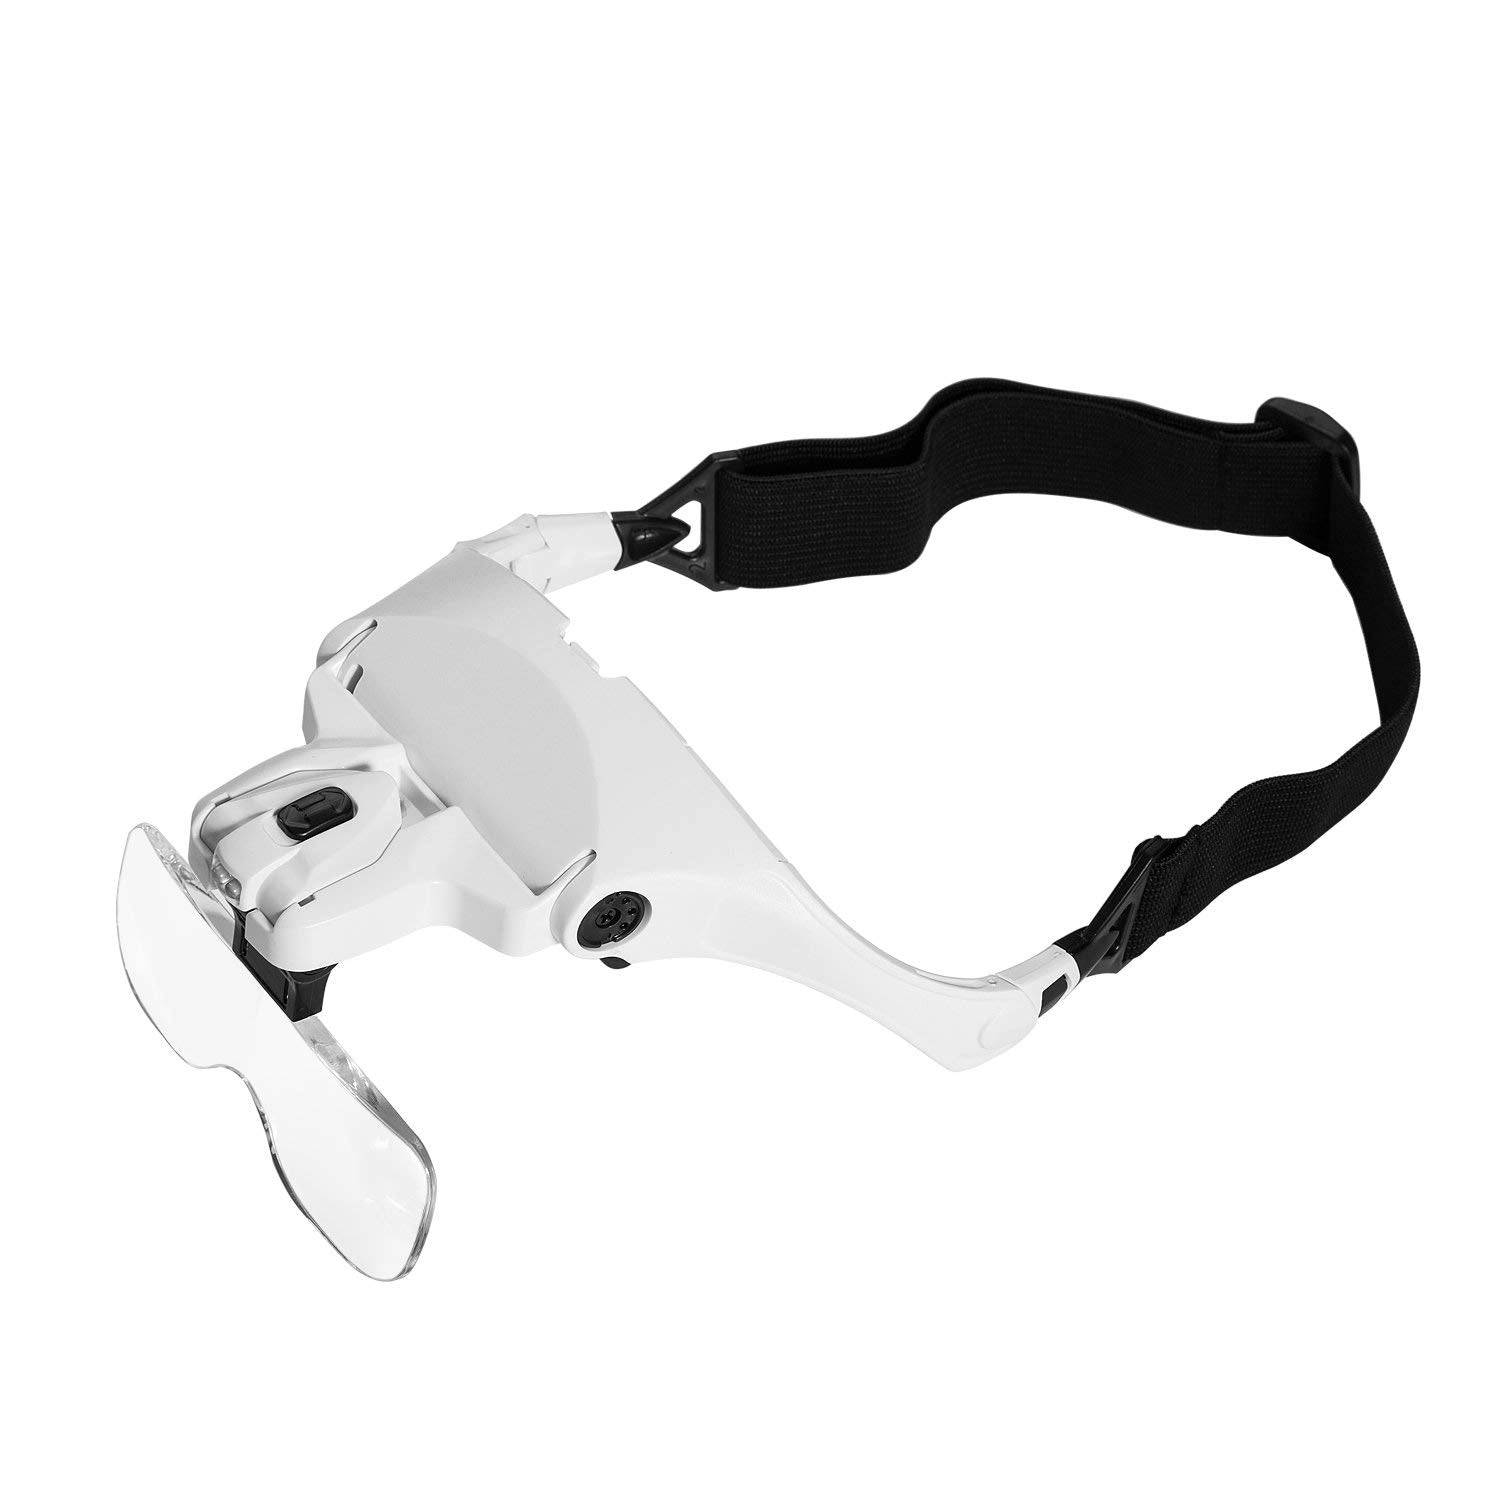 Headband Magnifier with LED Light, Head Mount Magnifier Glasses